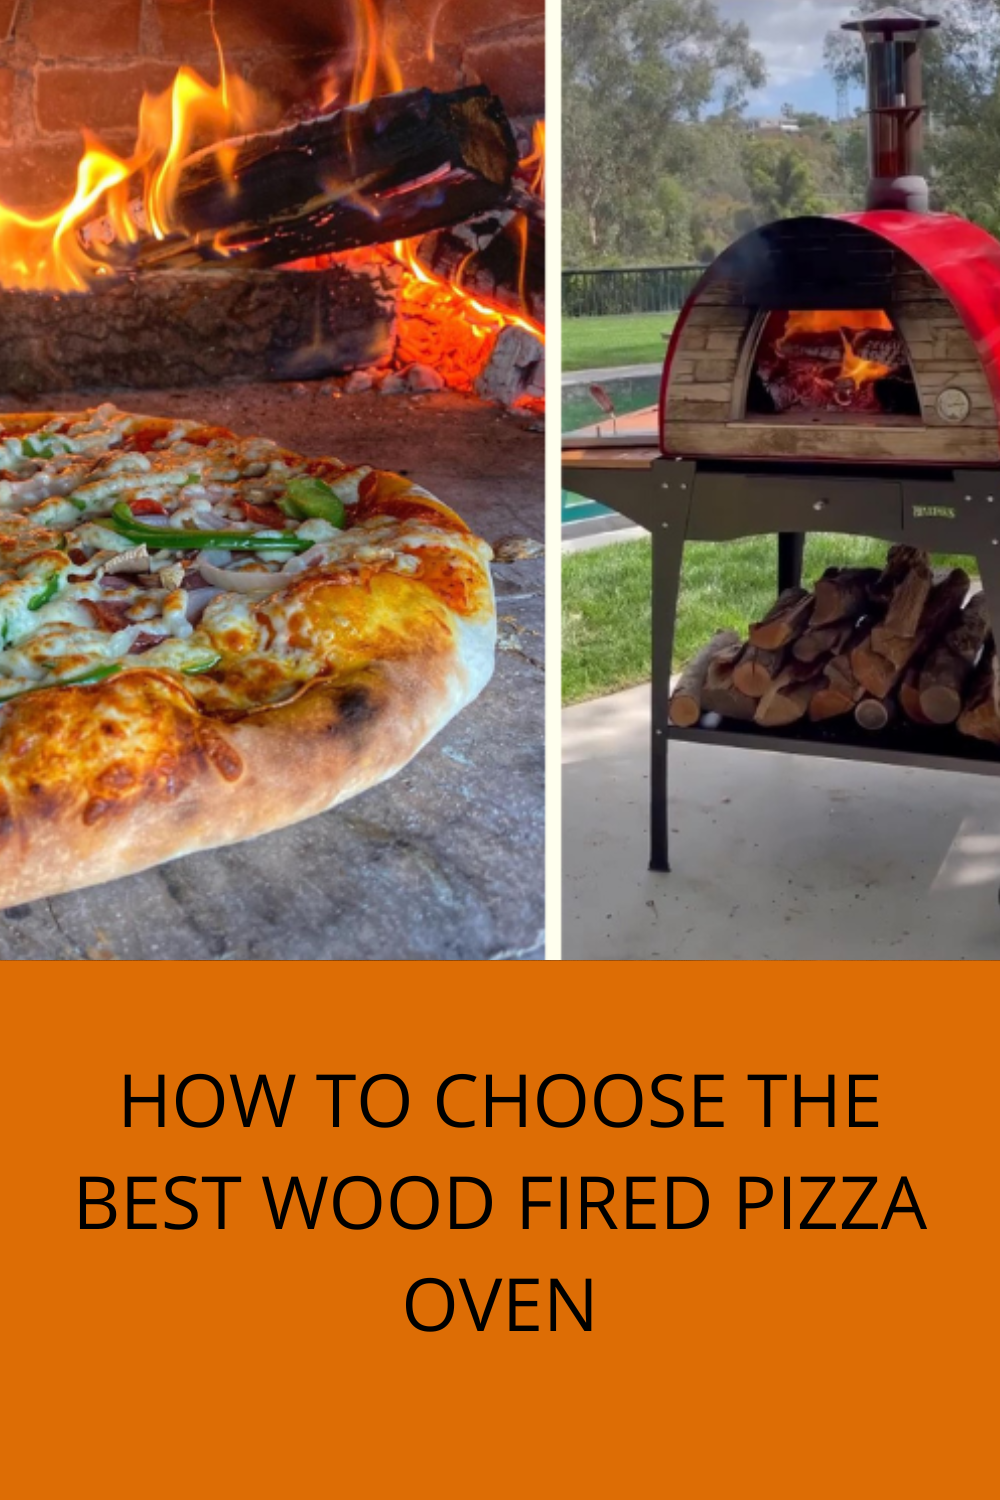 HOW TO CHOOSE THE BEST WOOD FIRED PIZZA OVEN